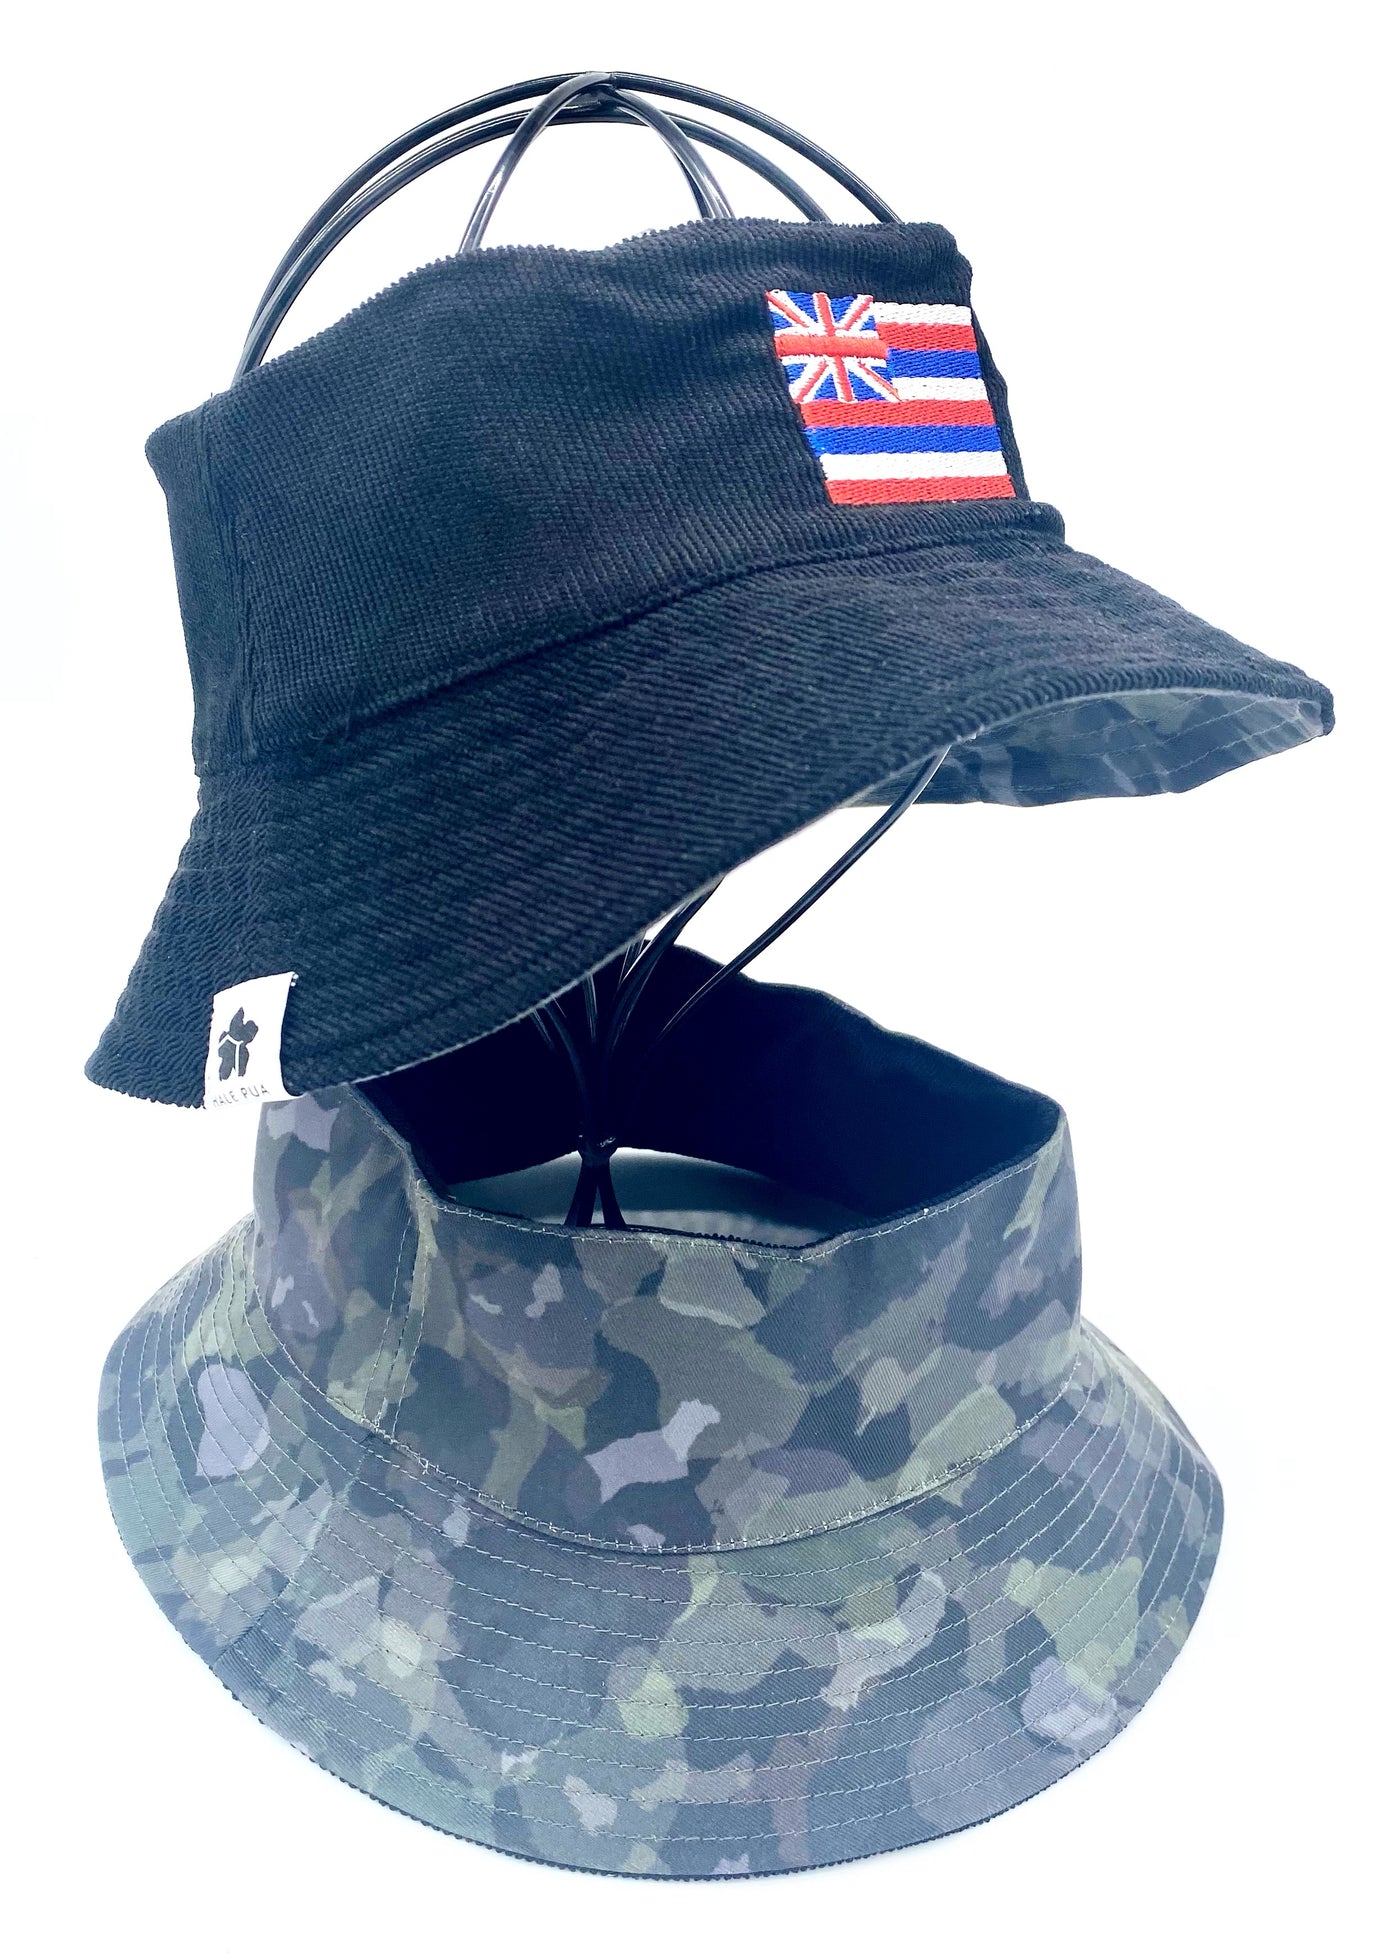 Checkered Palaka Bucket Hat Hawaiian Islands Bucket Hat All Cotton Fully  Reversible, Brown to Black or Choose Colors Choose Sizes XS to XL 